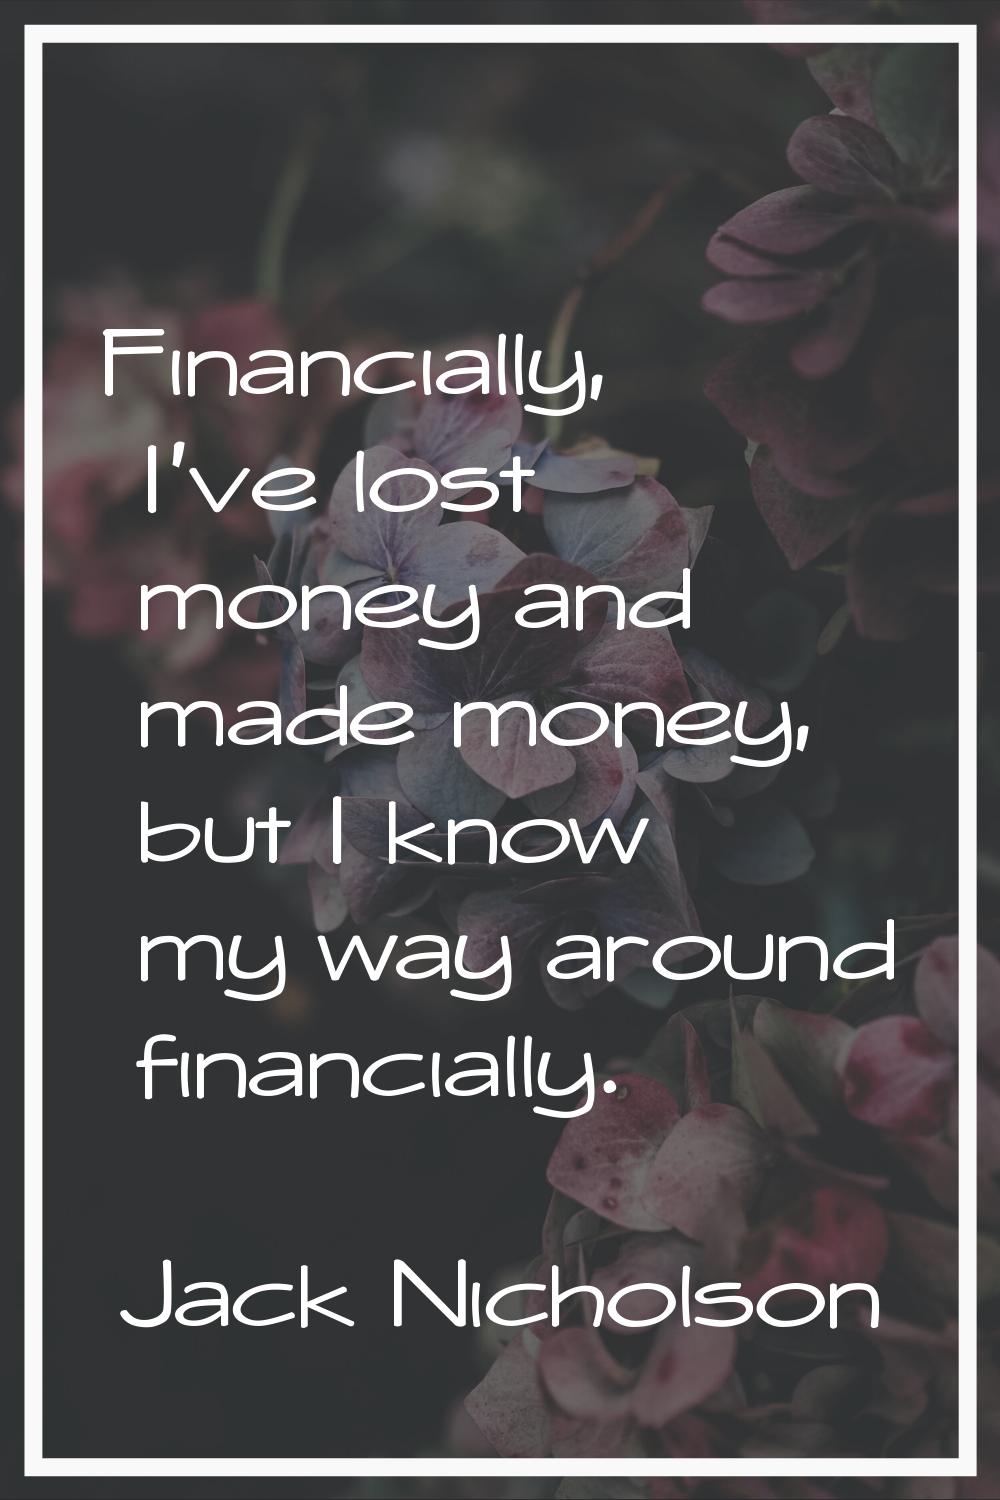 Financially, I've lost money and made money, but I know my way around financially.